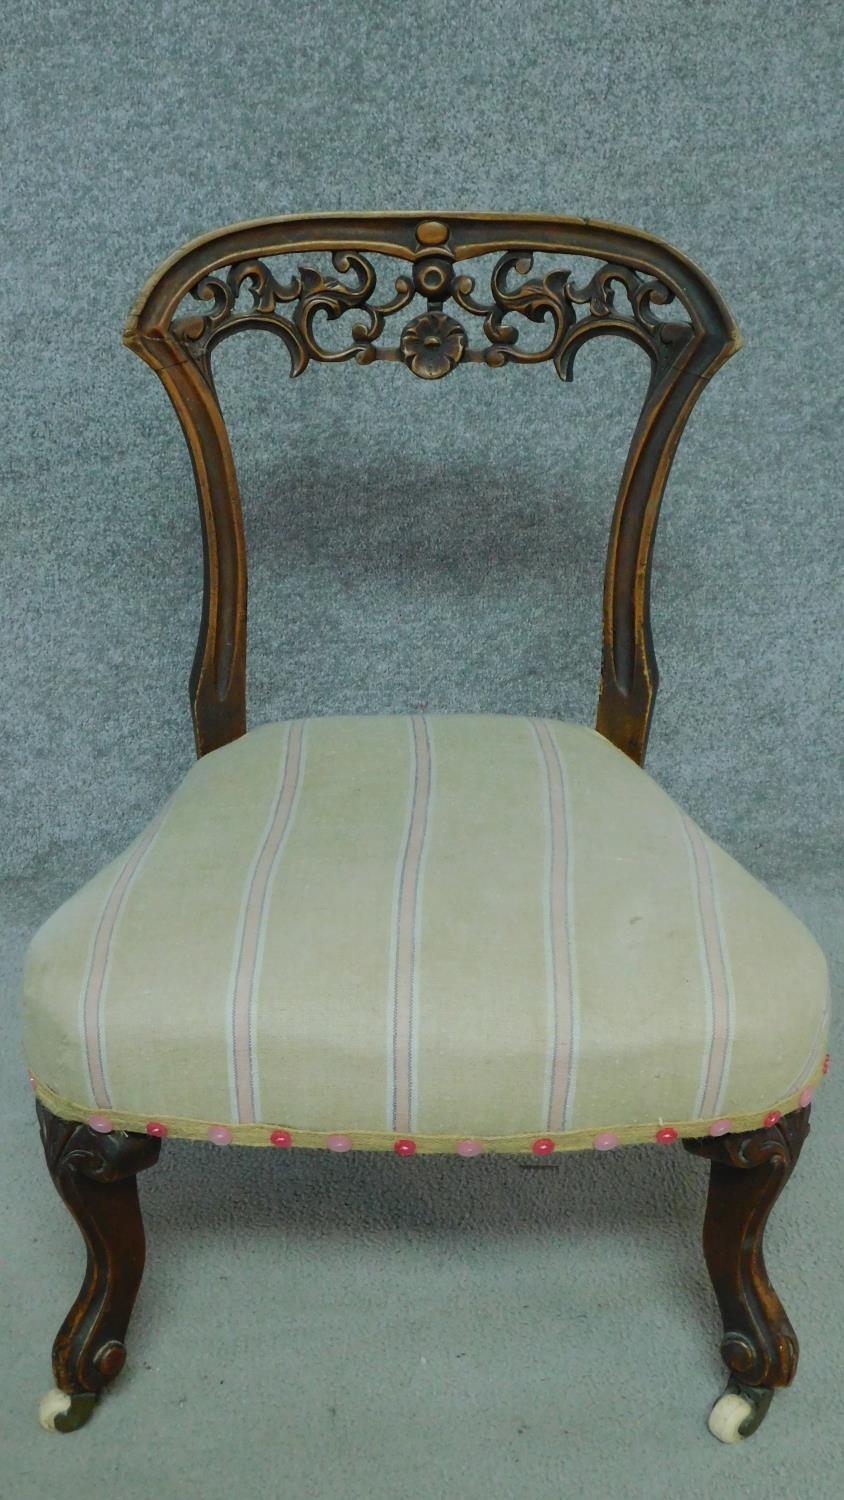 An Edwardian mahogany nursing chair with rouge floral upholstery and carved back on cabriole - Image 7 of 11